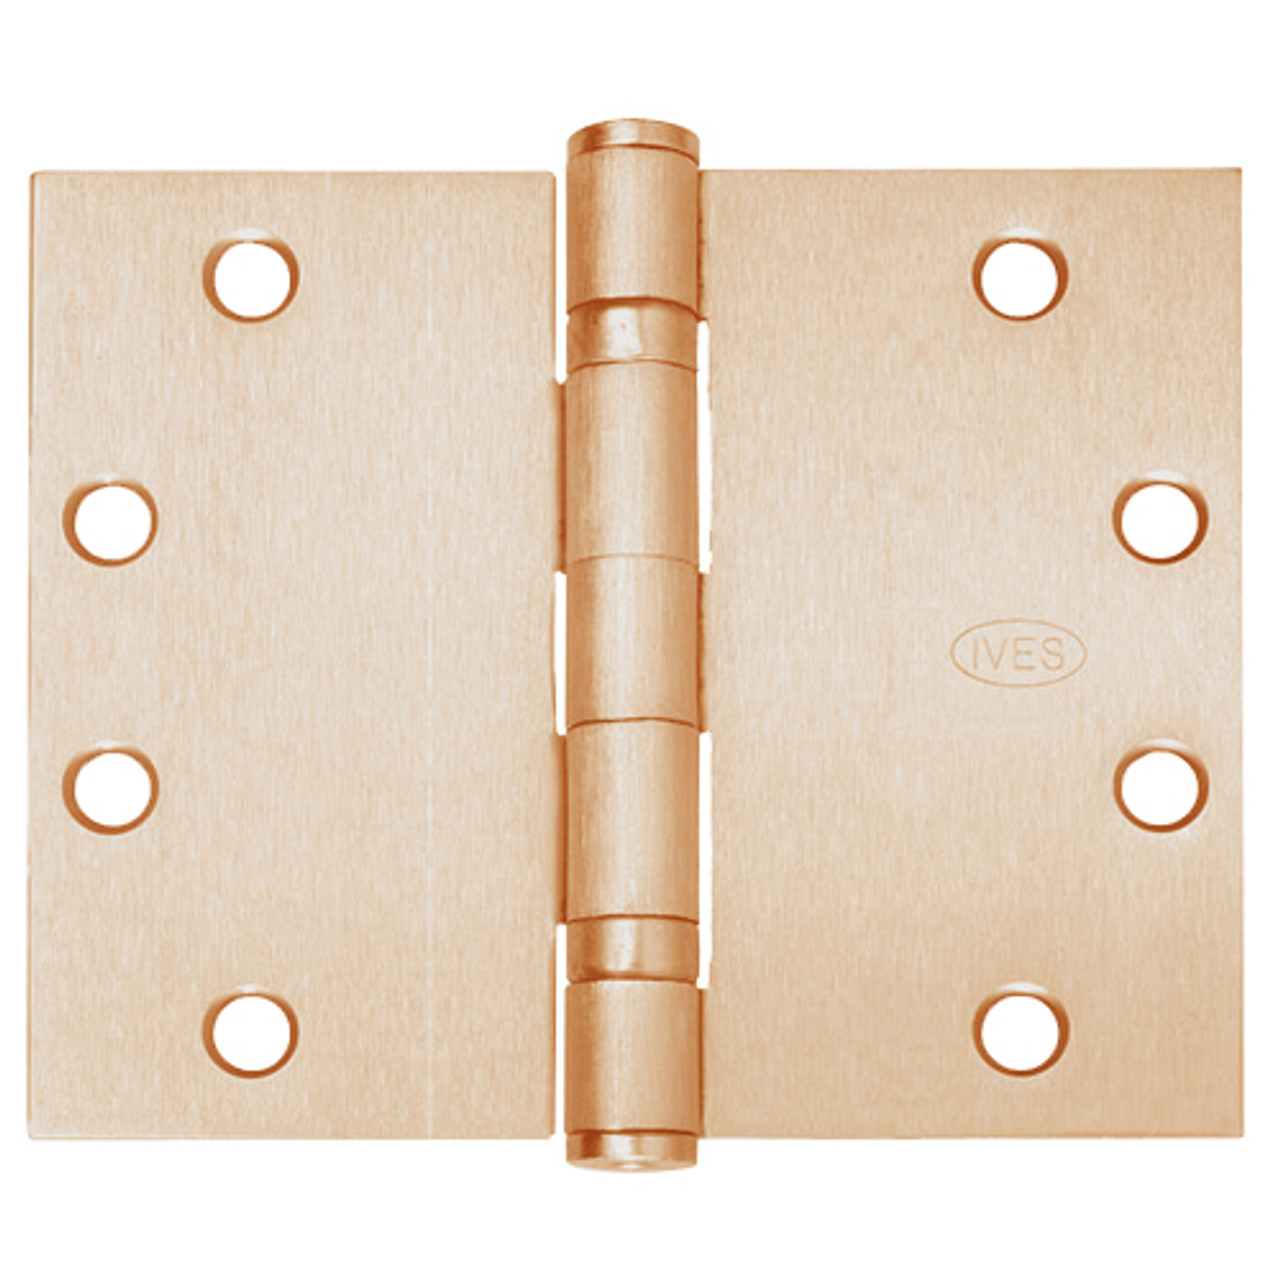 5BB1WT-5x7-639 IVES 5 Knuckle Ball Bearing Full Mortise Wide Throw Hinge in Satin Bronze Plated